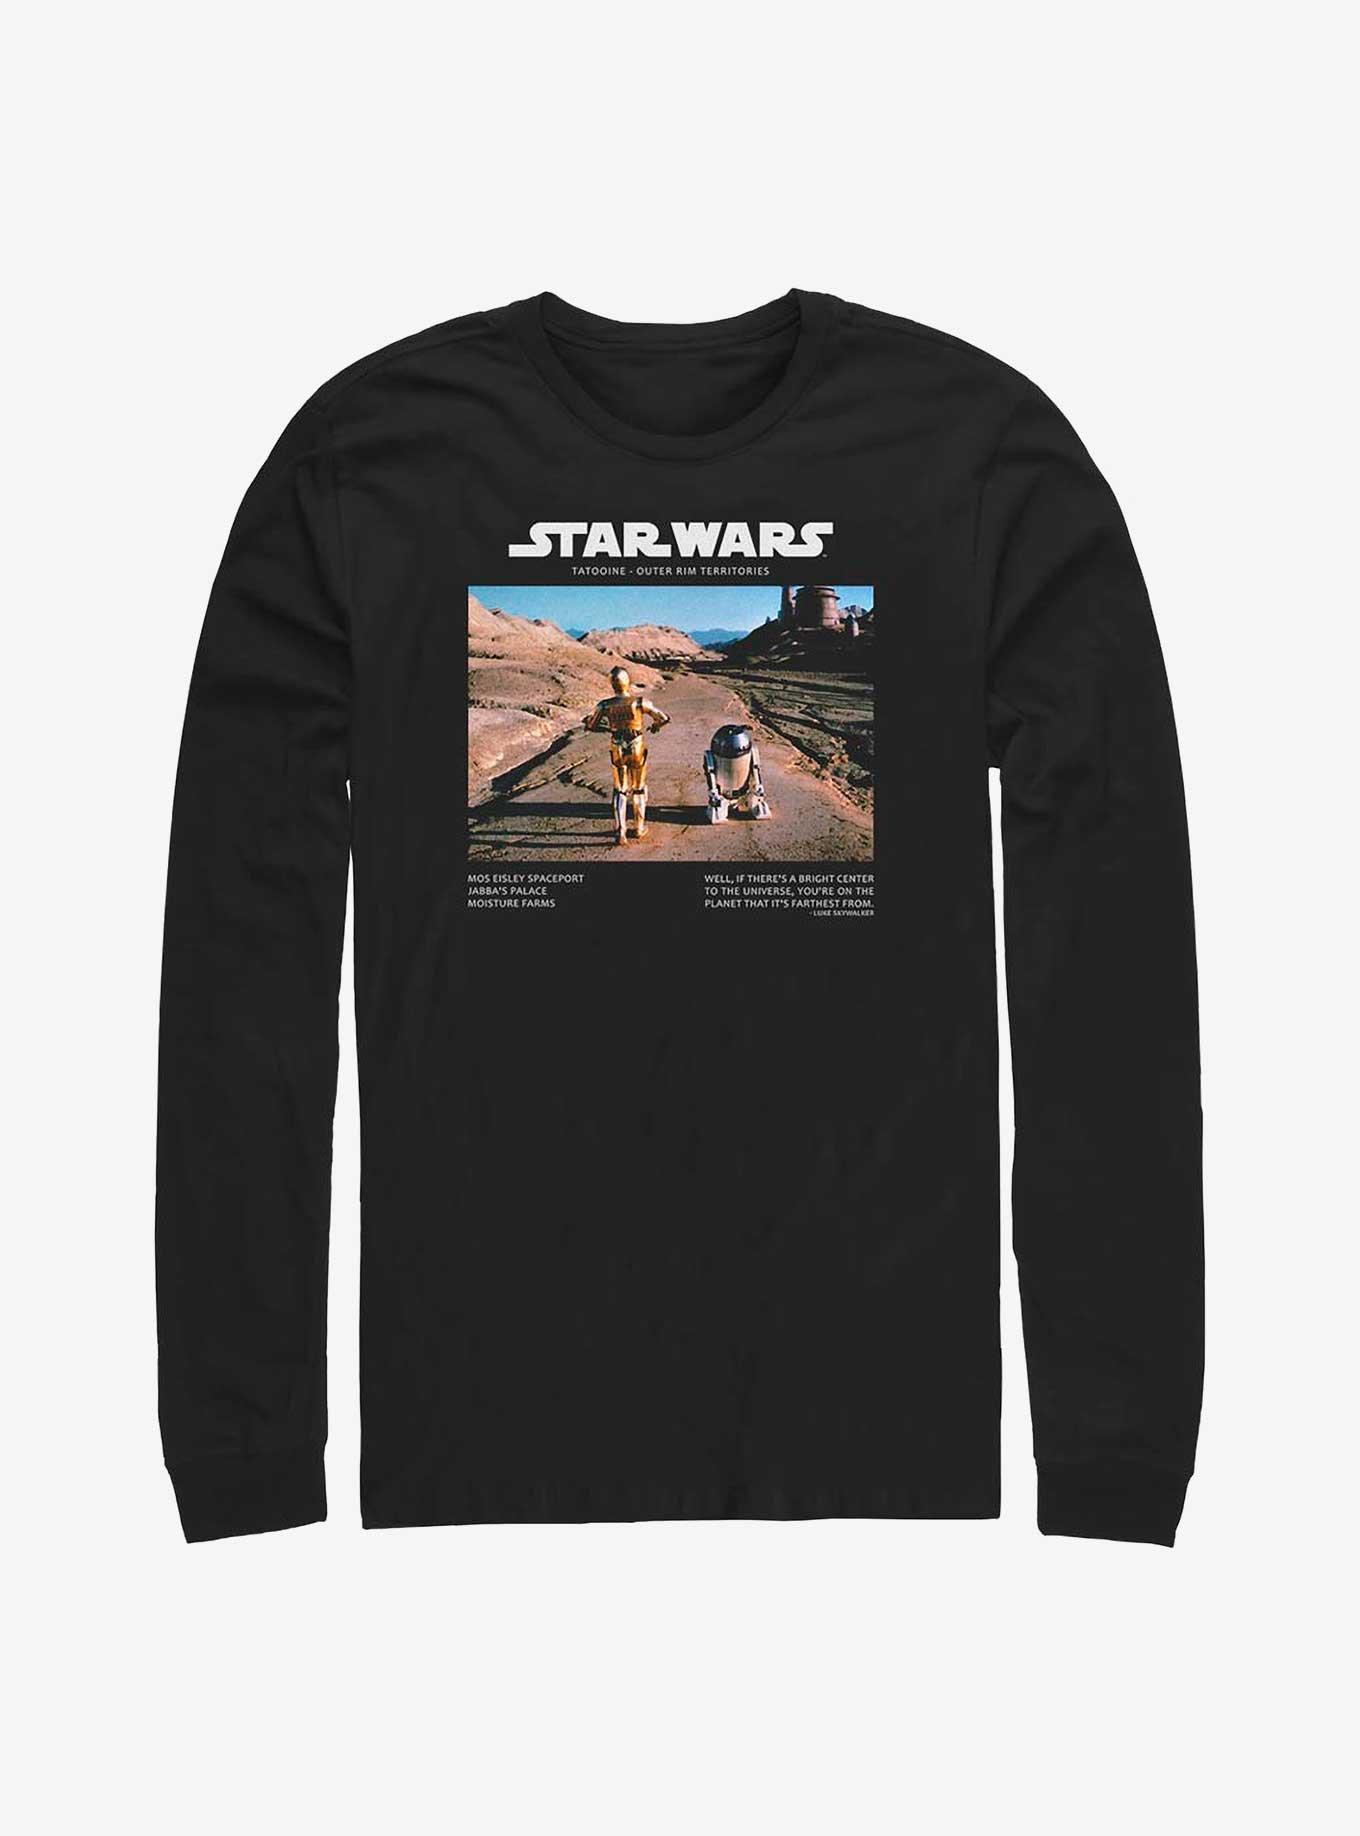 Star Wars Tatooine Travelers C-3PO and R2-D2 Long-Sleeve T-Shirt